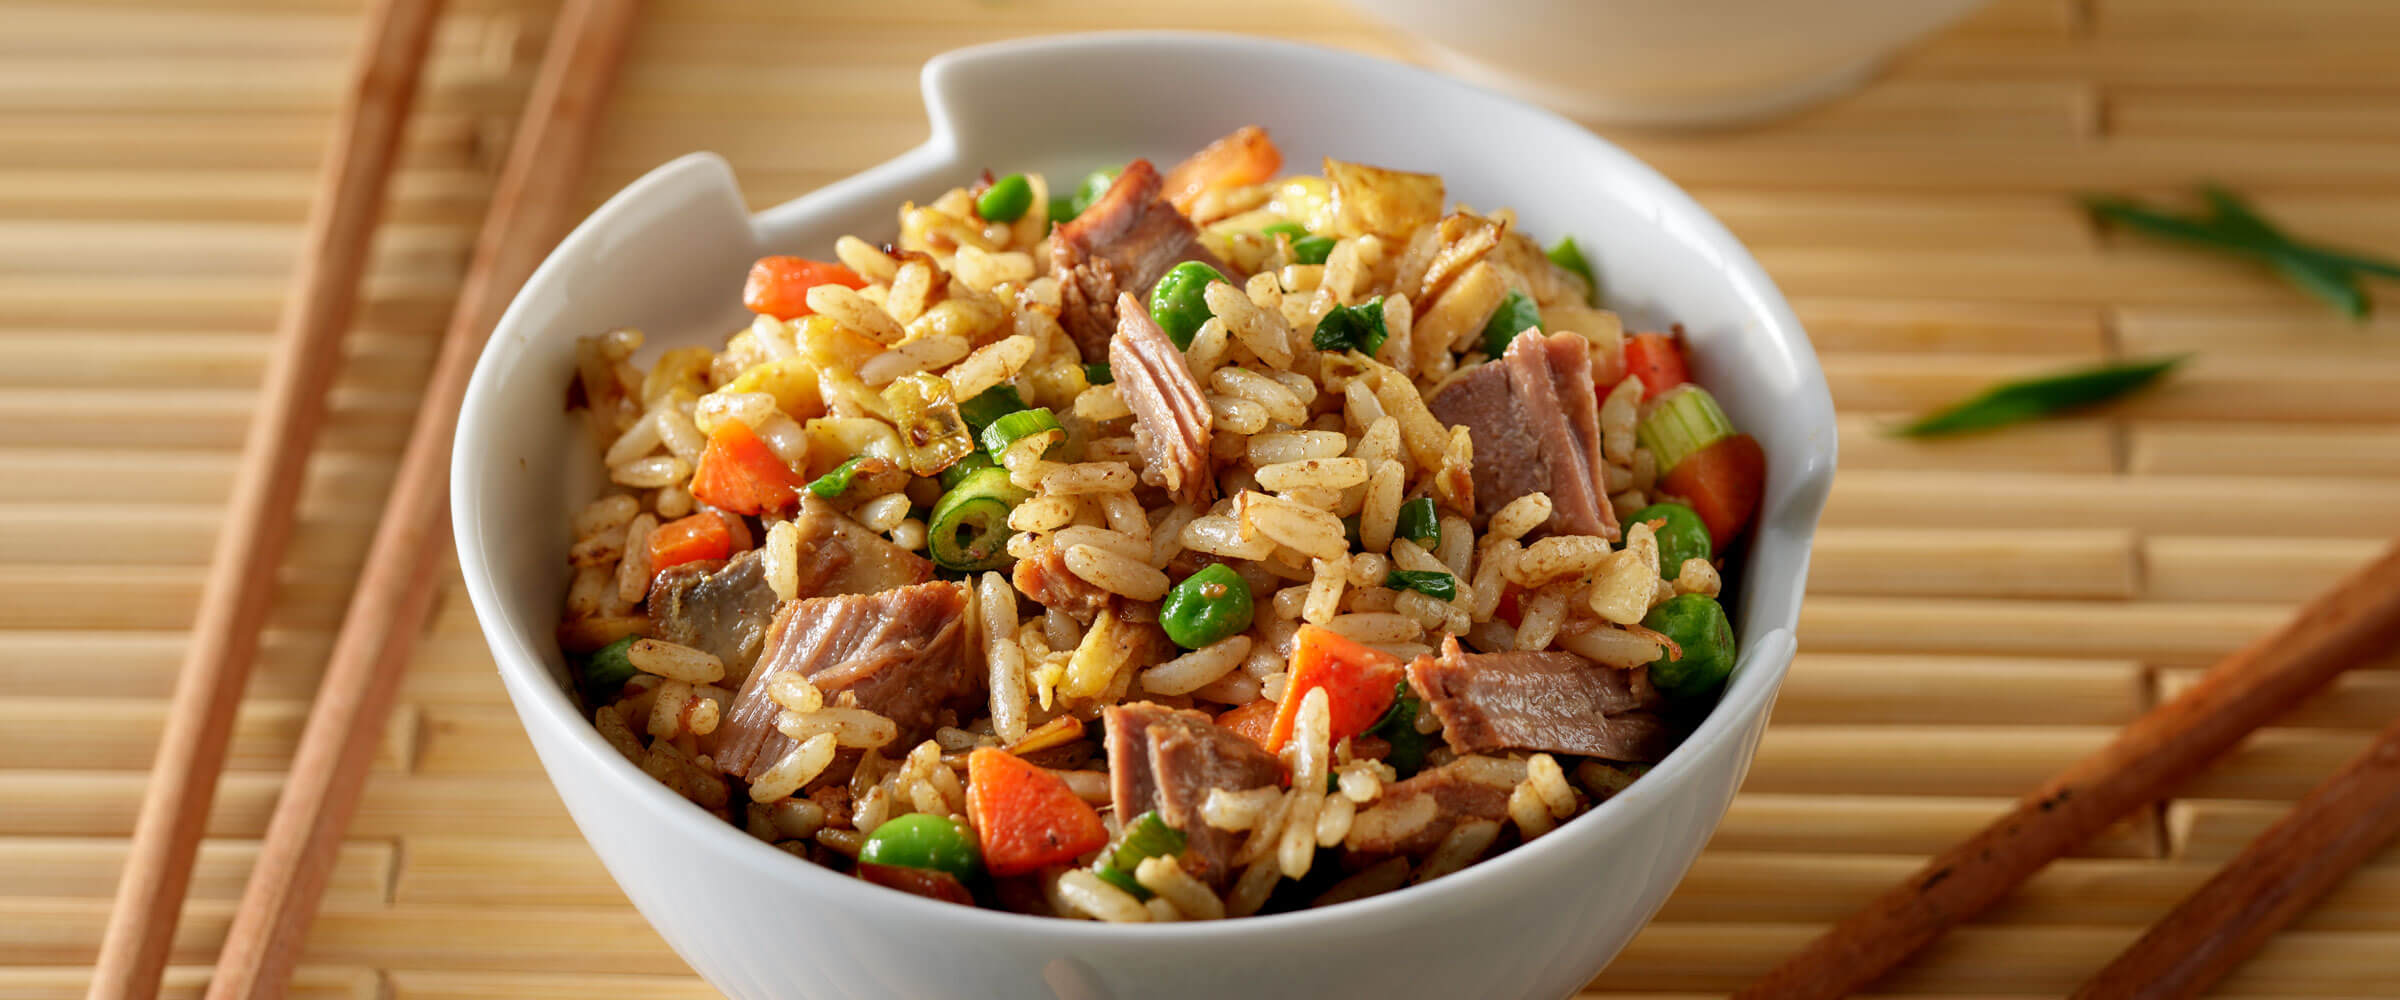 Beef Tips Fried Rice in white bowl with chopsticks